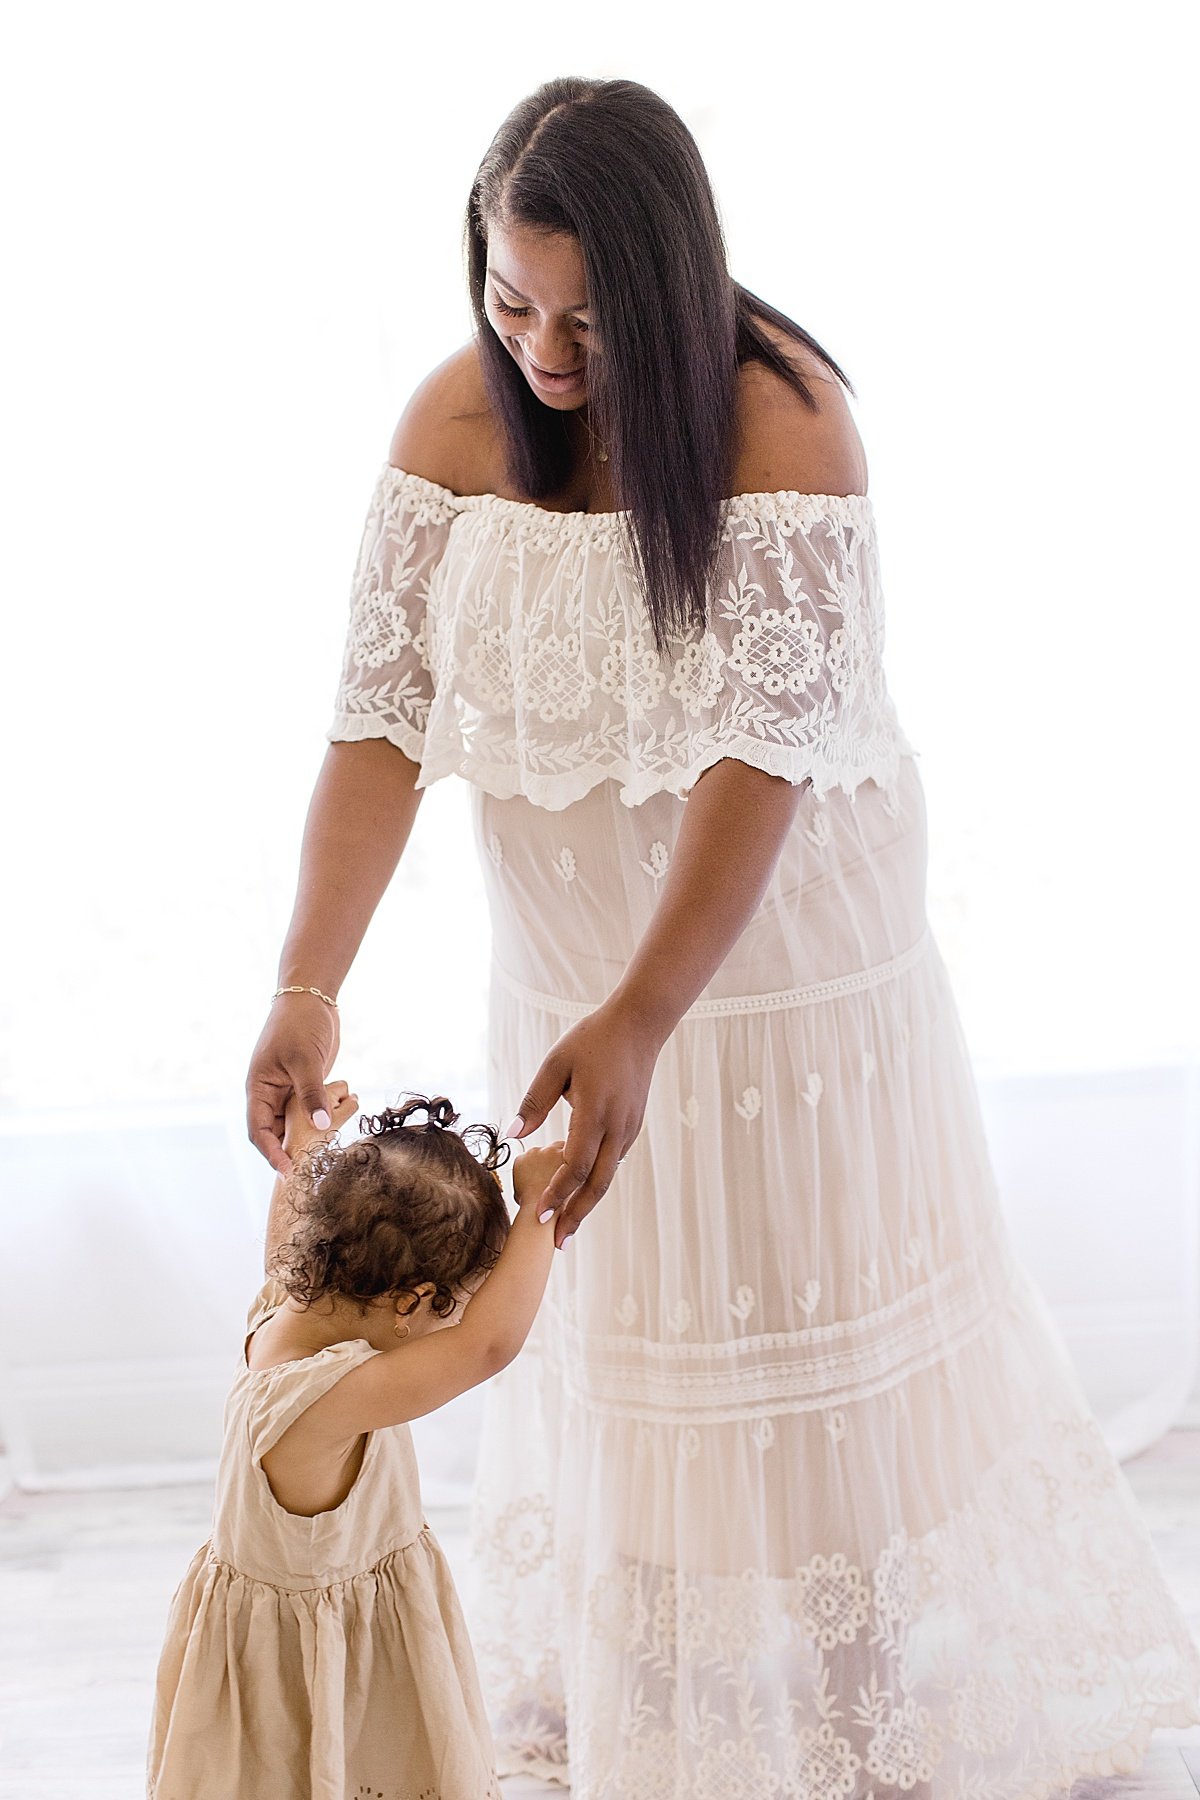 Mom and Daughter dancing together during Maternity Session with Ambre Williams Photography in Newport Beach